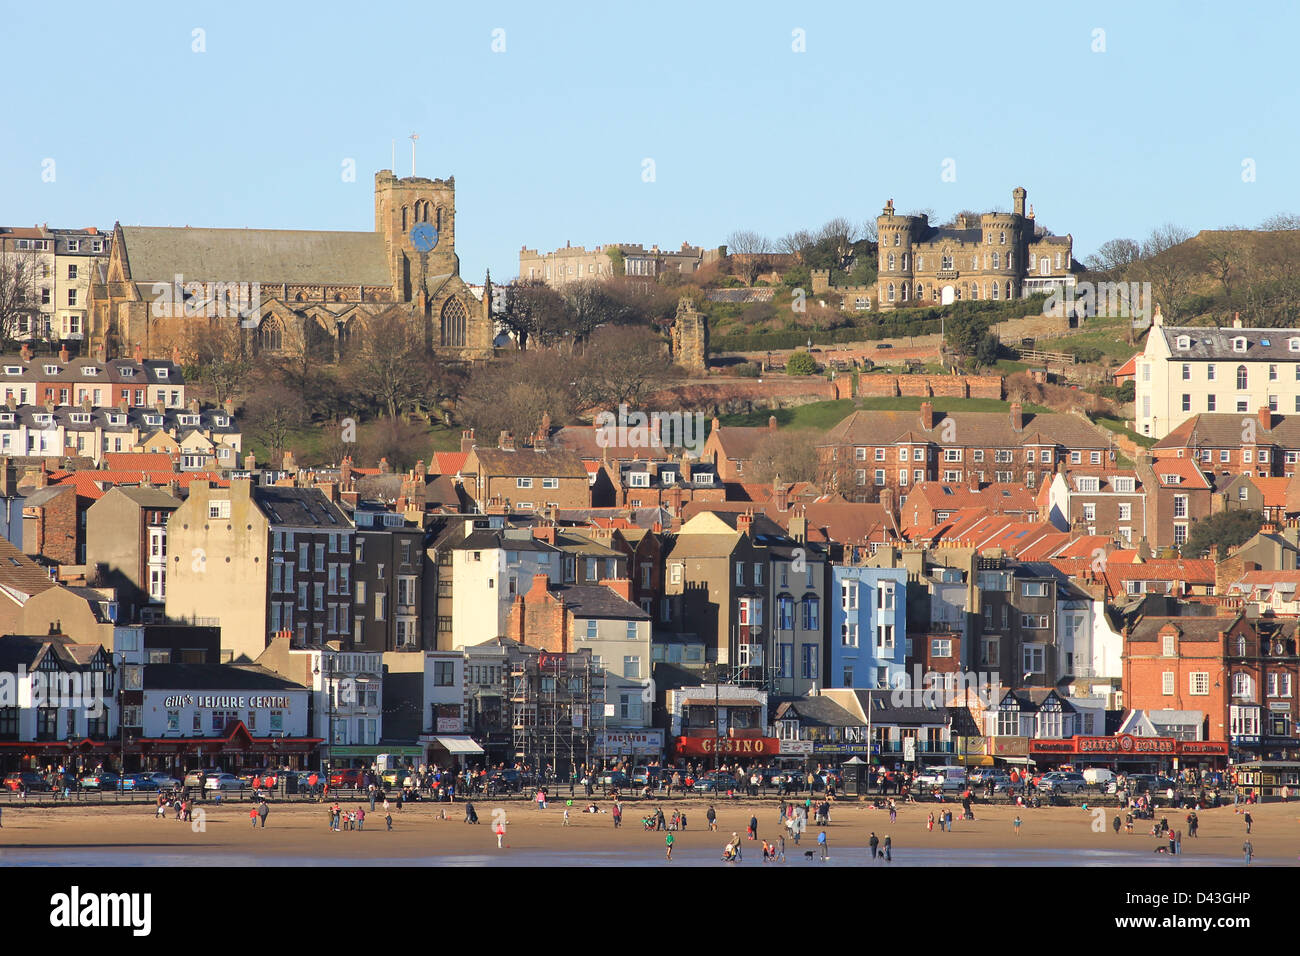 Scarborough, North Yorkshire, England, March 02 2013: Photograph of Scarbrough South Bay Beach and St Marys Church seen across t Stock Photo